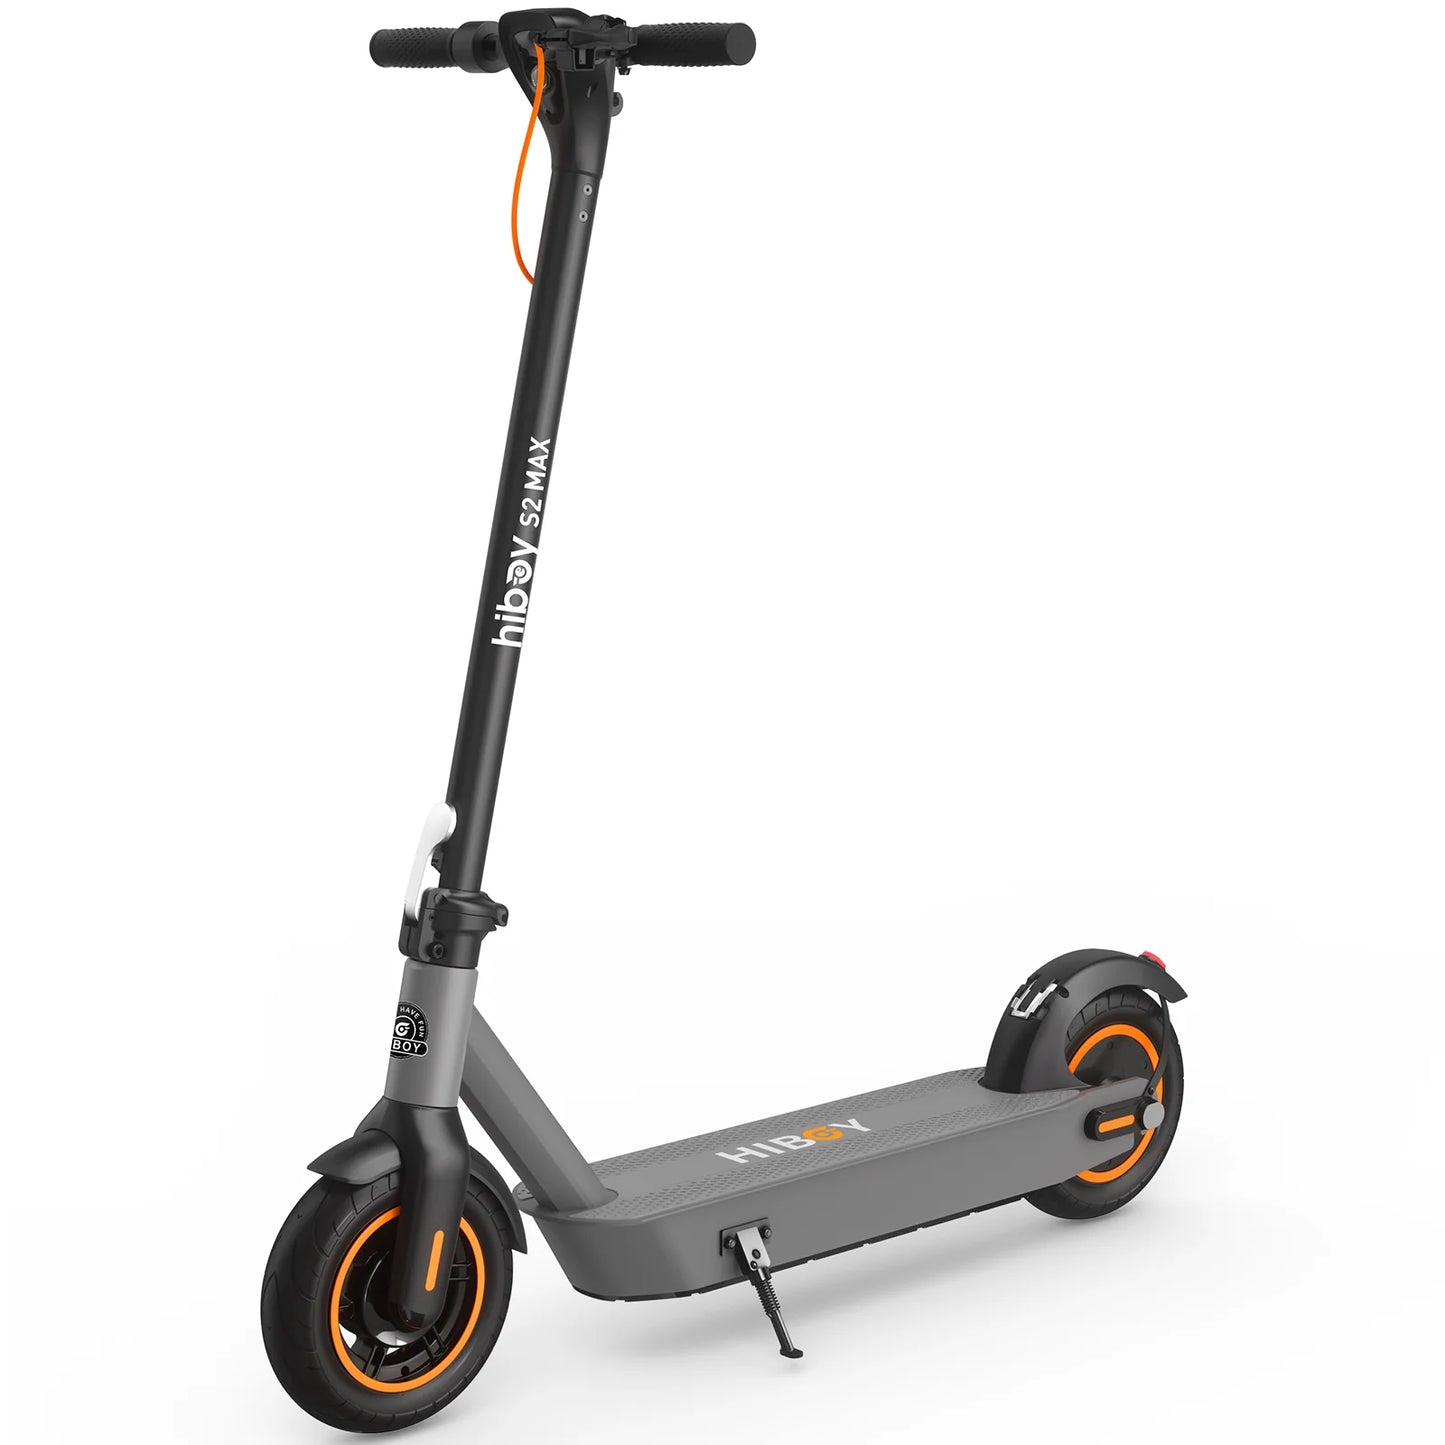 Hiboy S2 Max Electric Scooter – Premium Performance for Des Moines Riders